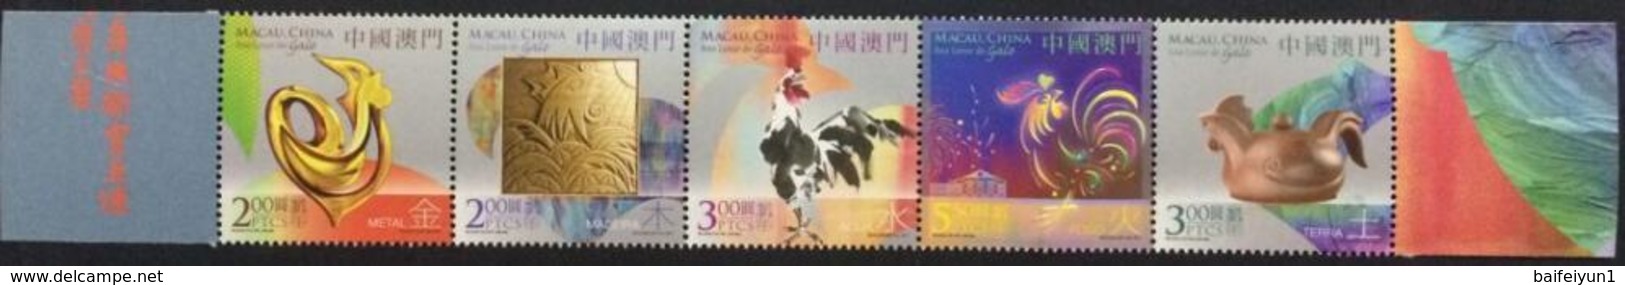 Macao 2017 MNH Year Of Rooster 5v Strip Chinese Lunar New Year Stamps - Nuevos